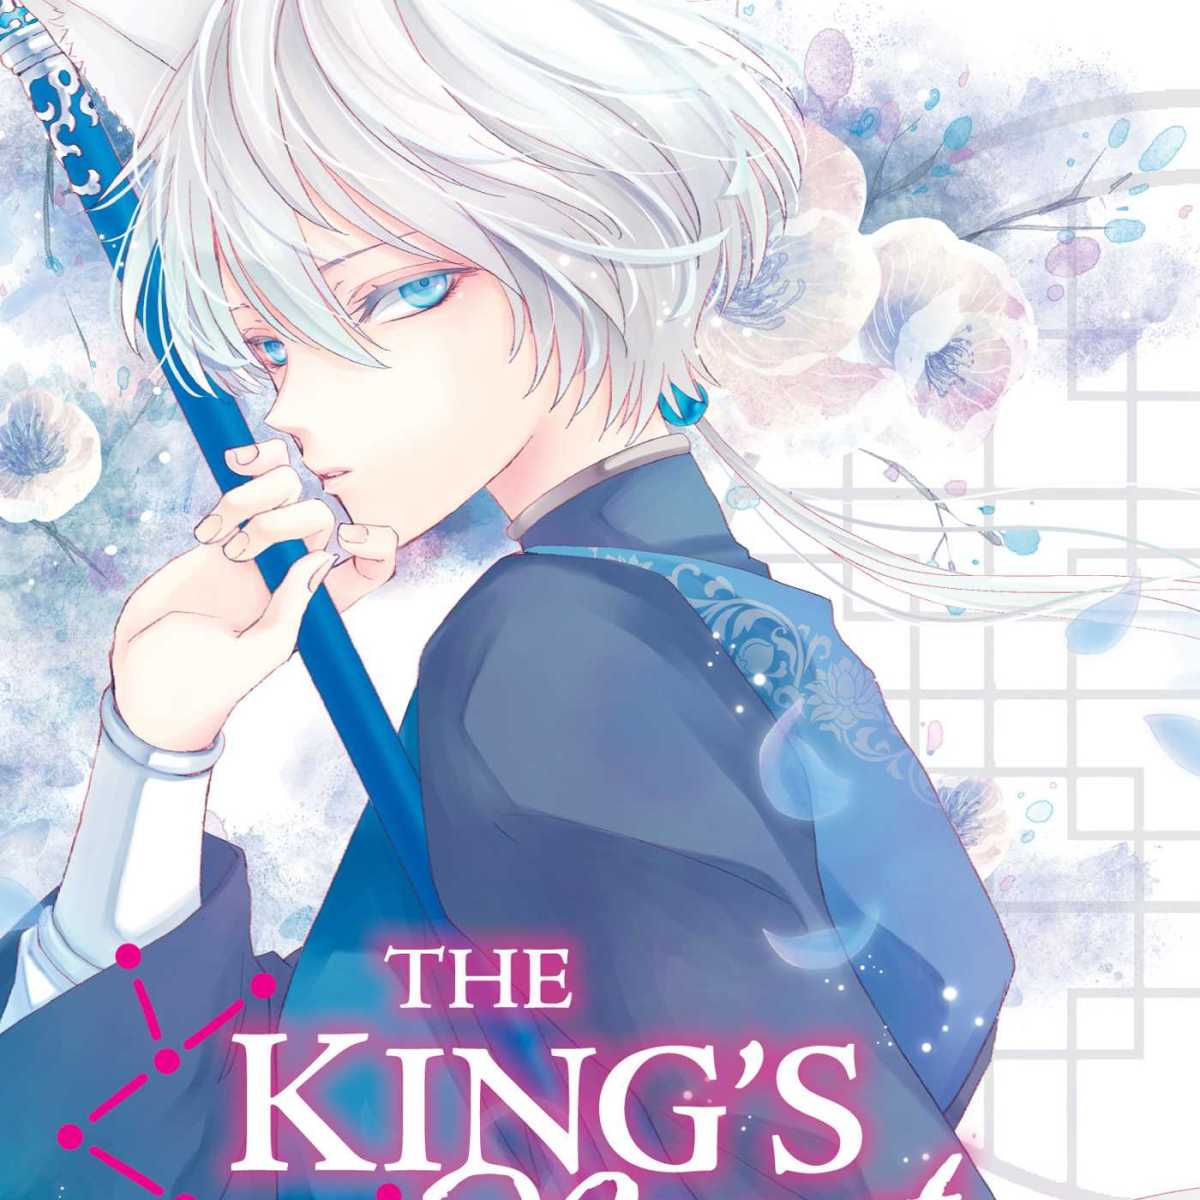 The Kings Beast Vol. 1 Review